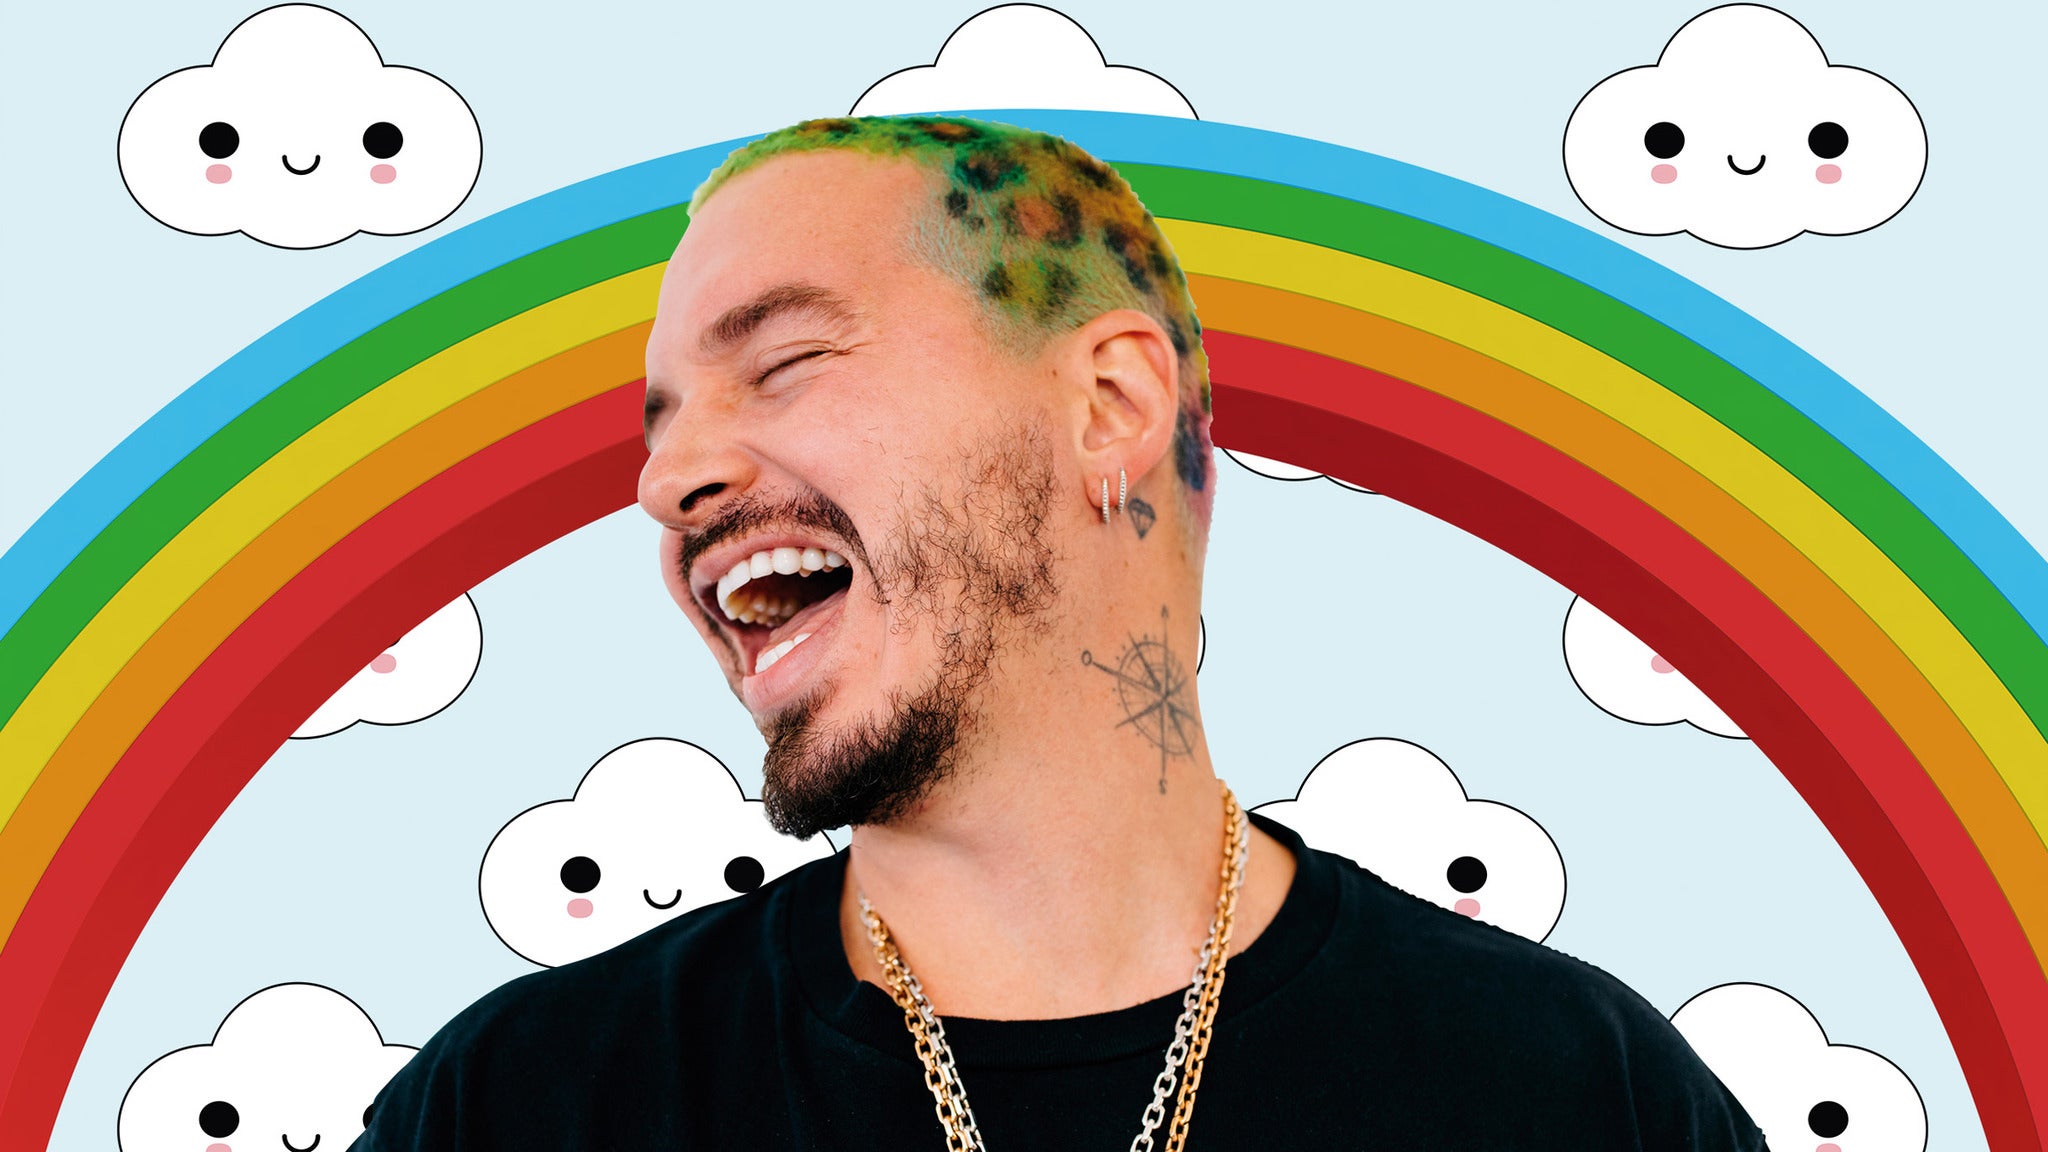 J Balvin Vibras Tour in Brooklyn promo photo for All Access presale offer code